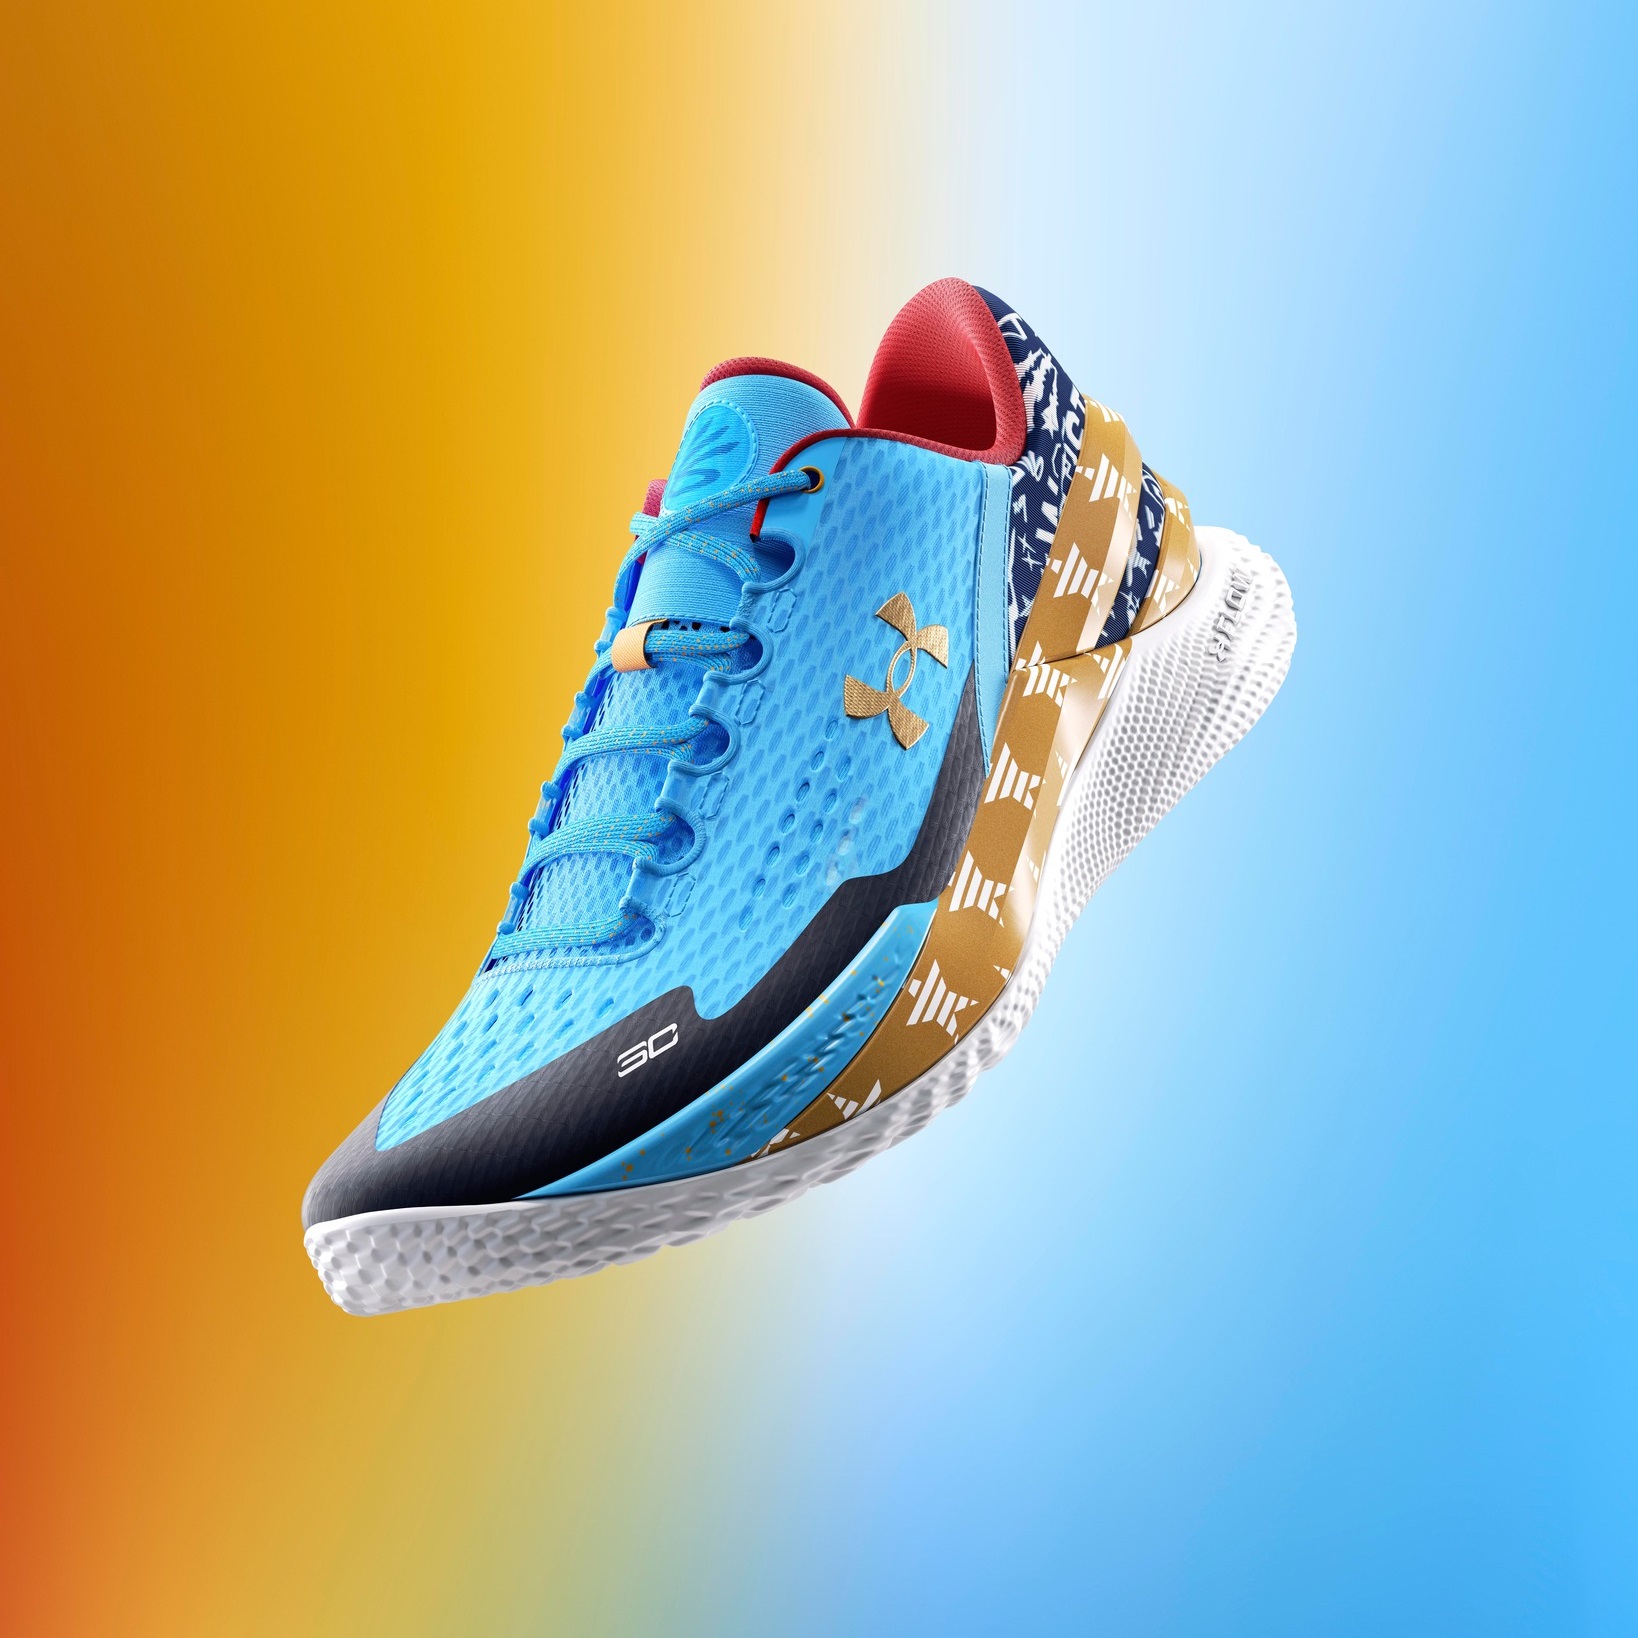 UNDER ARMOUR] Curry 2 Low Flotro 